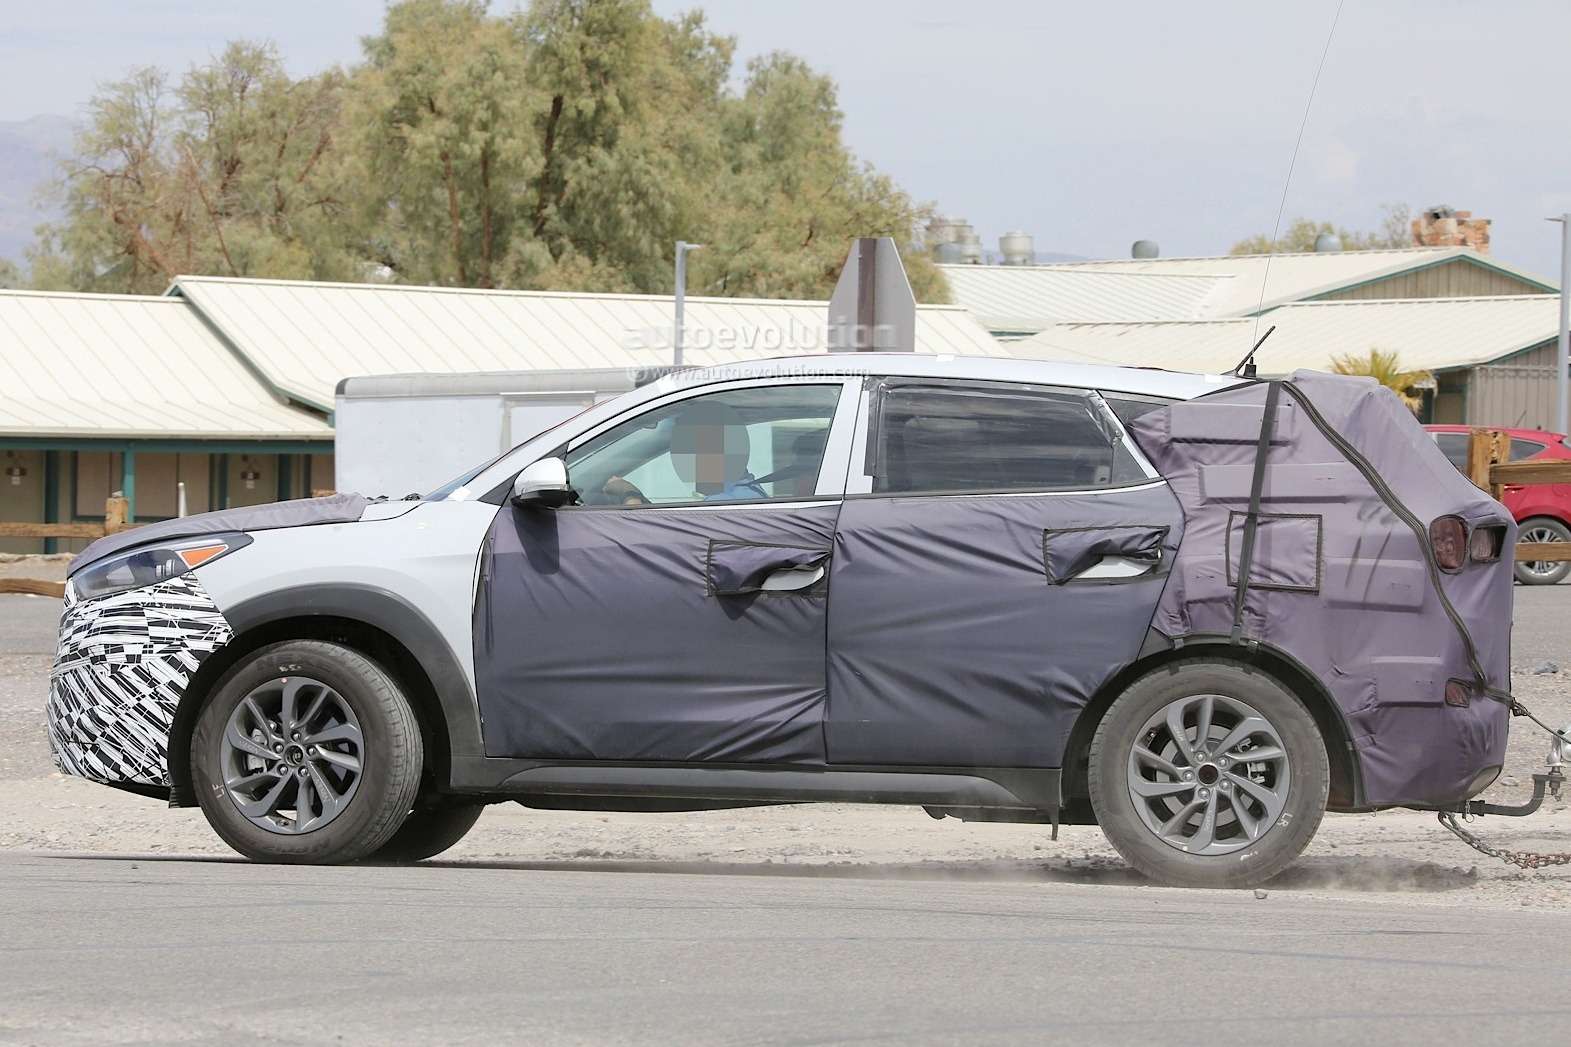 all-new-2016-hyundai-tucson-spied-with-less-camouflage-in-america-photo-gallery-1080p-8